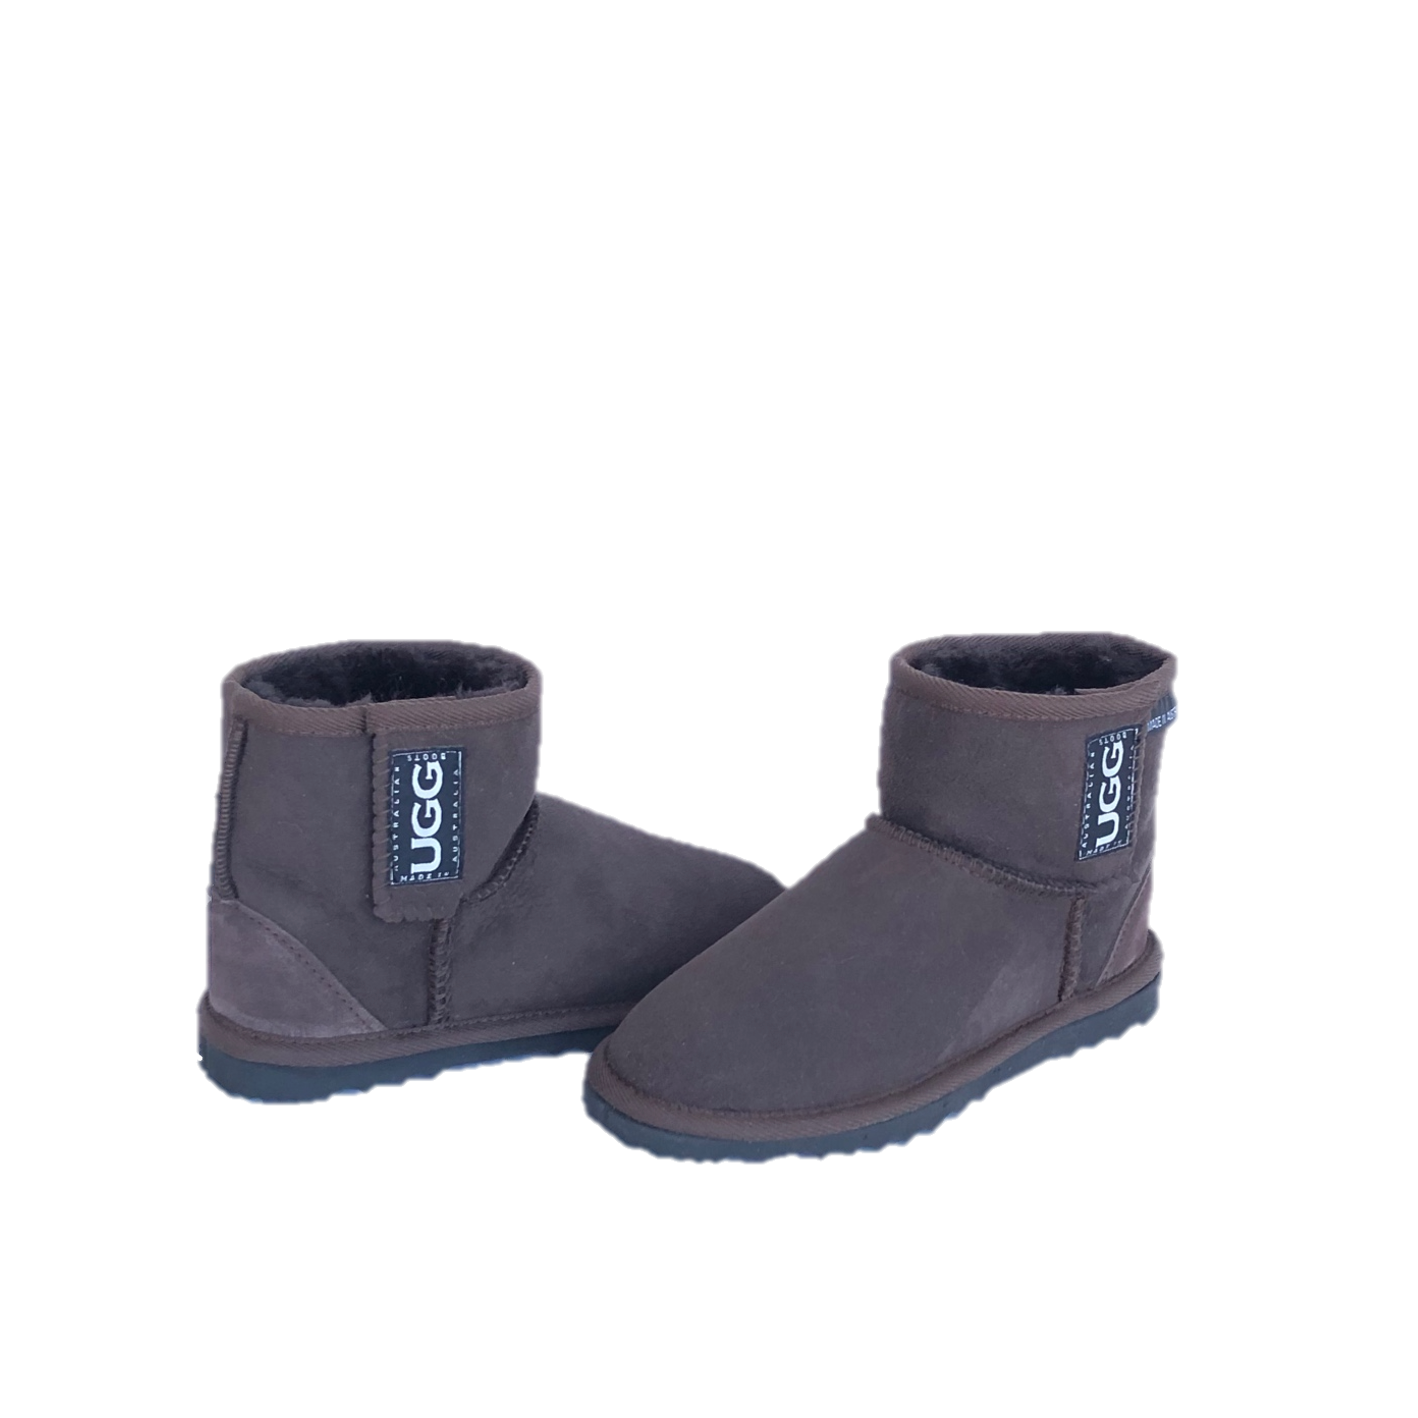 Kid's Ugg Boots in Chocolate